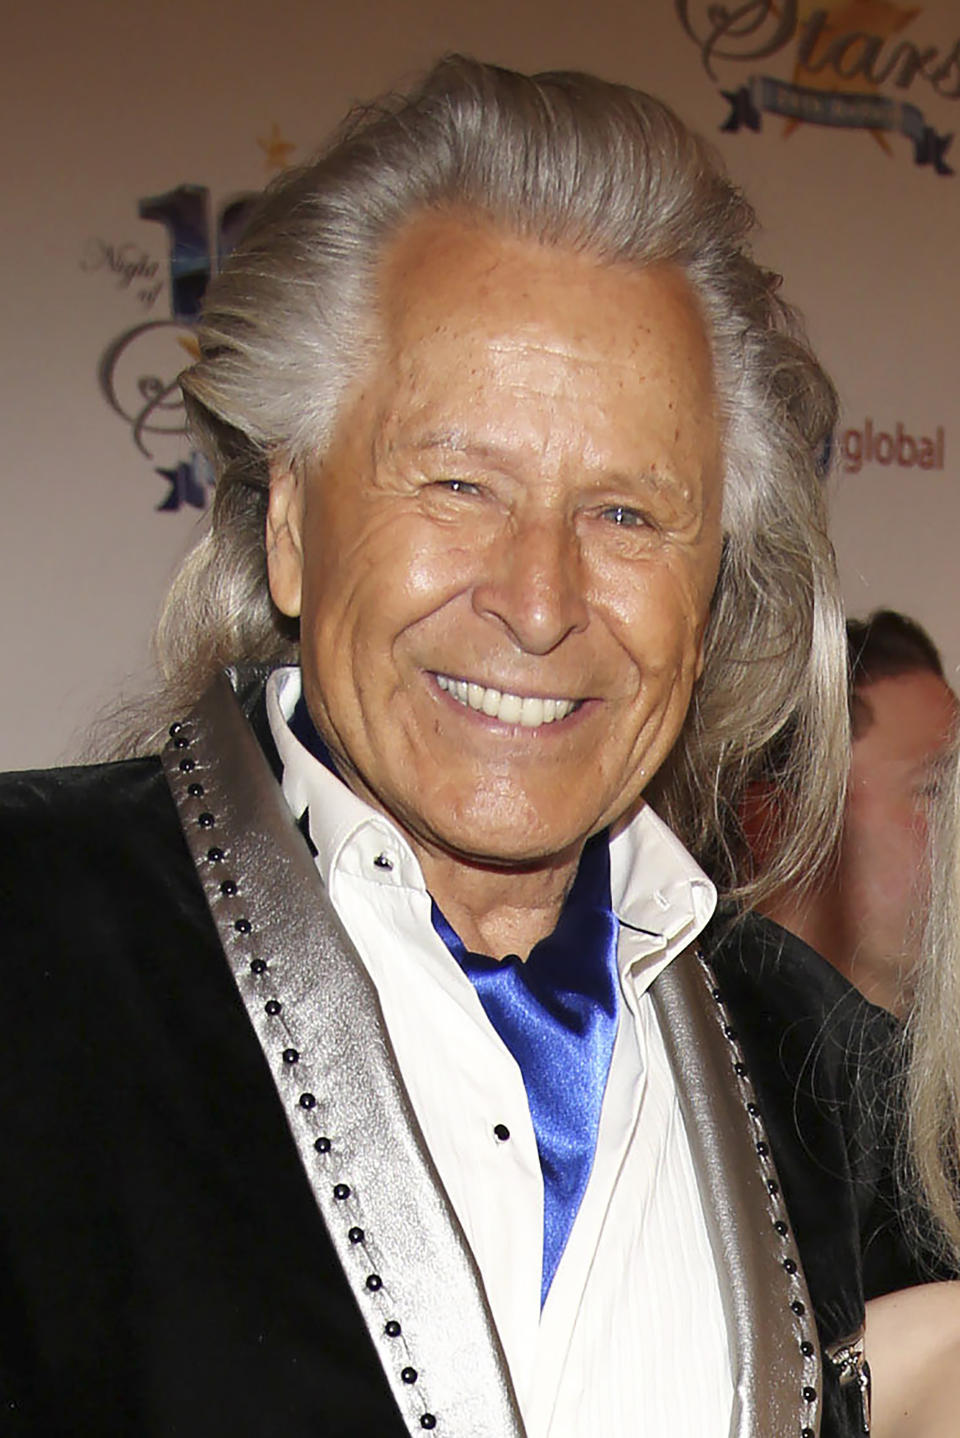 FILE - In this March 2, 2014, file photo, Peter Nygard attends the 24th Night of 100 Stars Oscars Viewing Gala at The Beverly Hills Hotel in Beverly Hills, Calif. Nygard faces criminal charges in New York after his Canadian arrest on charges alleging that he dangled opportunities in fashion and modeling to lure dozens of women and girls to have sex with himself and others. The 79-year-old Nygard awaited an appearance in a Winnipeg courtroom after his Monday, Dec. 14, 2020 arrest in Winnipeg, Manitoba, Canada by Canadian authorities at the request of the United States. (Annie I. Bang /Invision/AP, File)